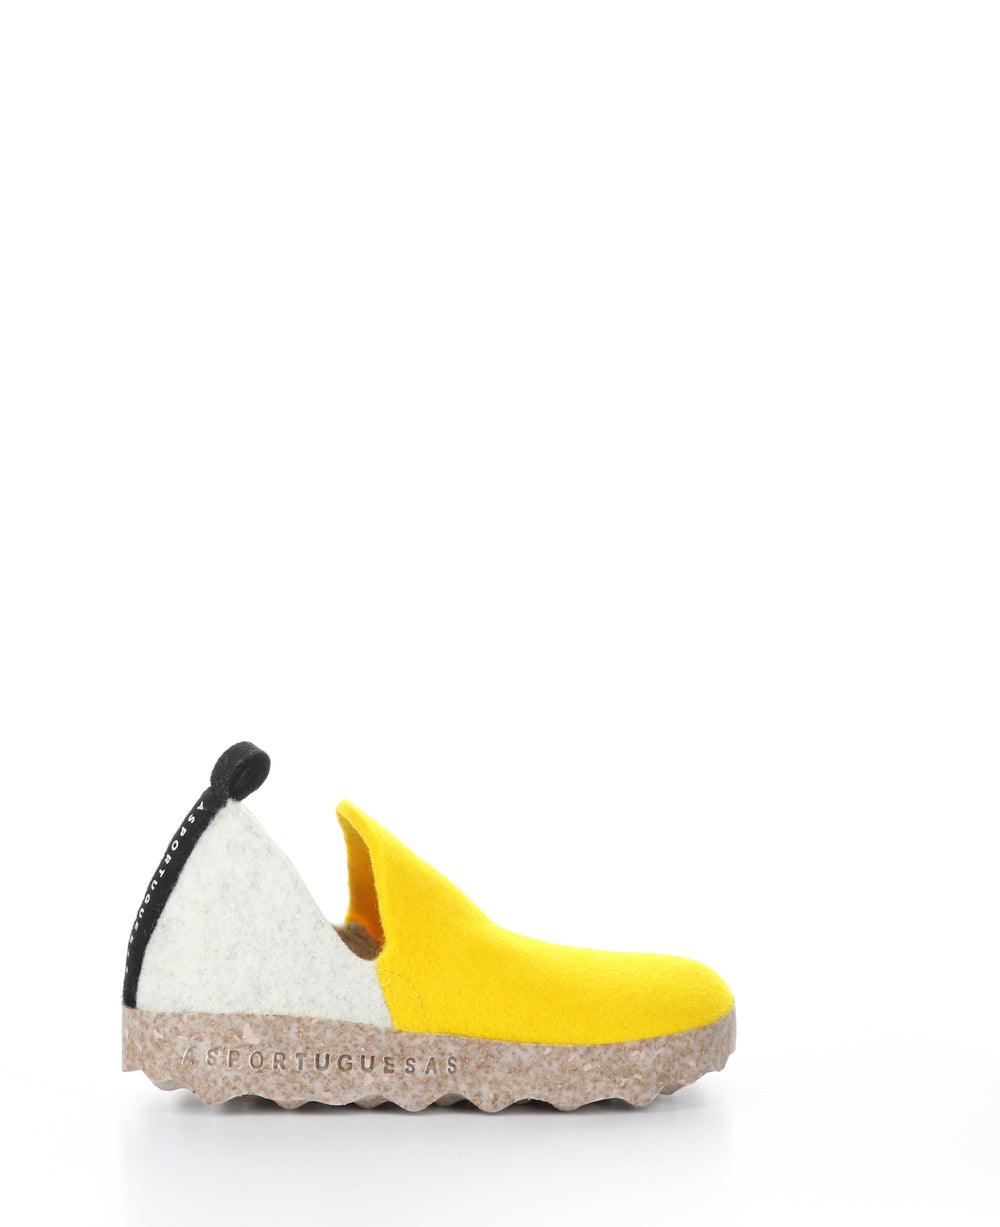 CITY086ASP Yellow/Owht/Blk Round Toe Shoes